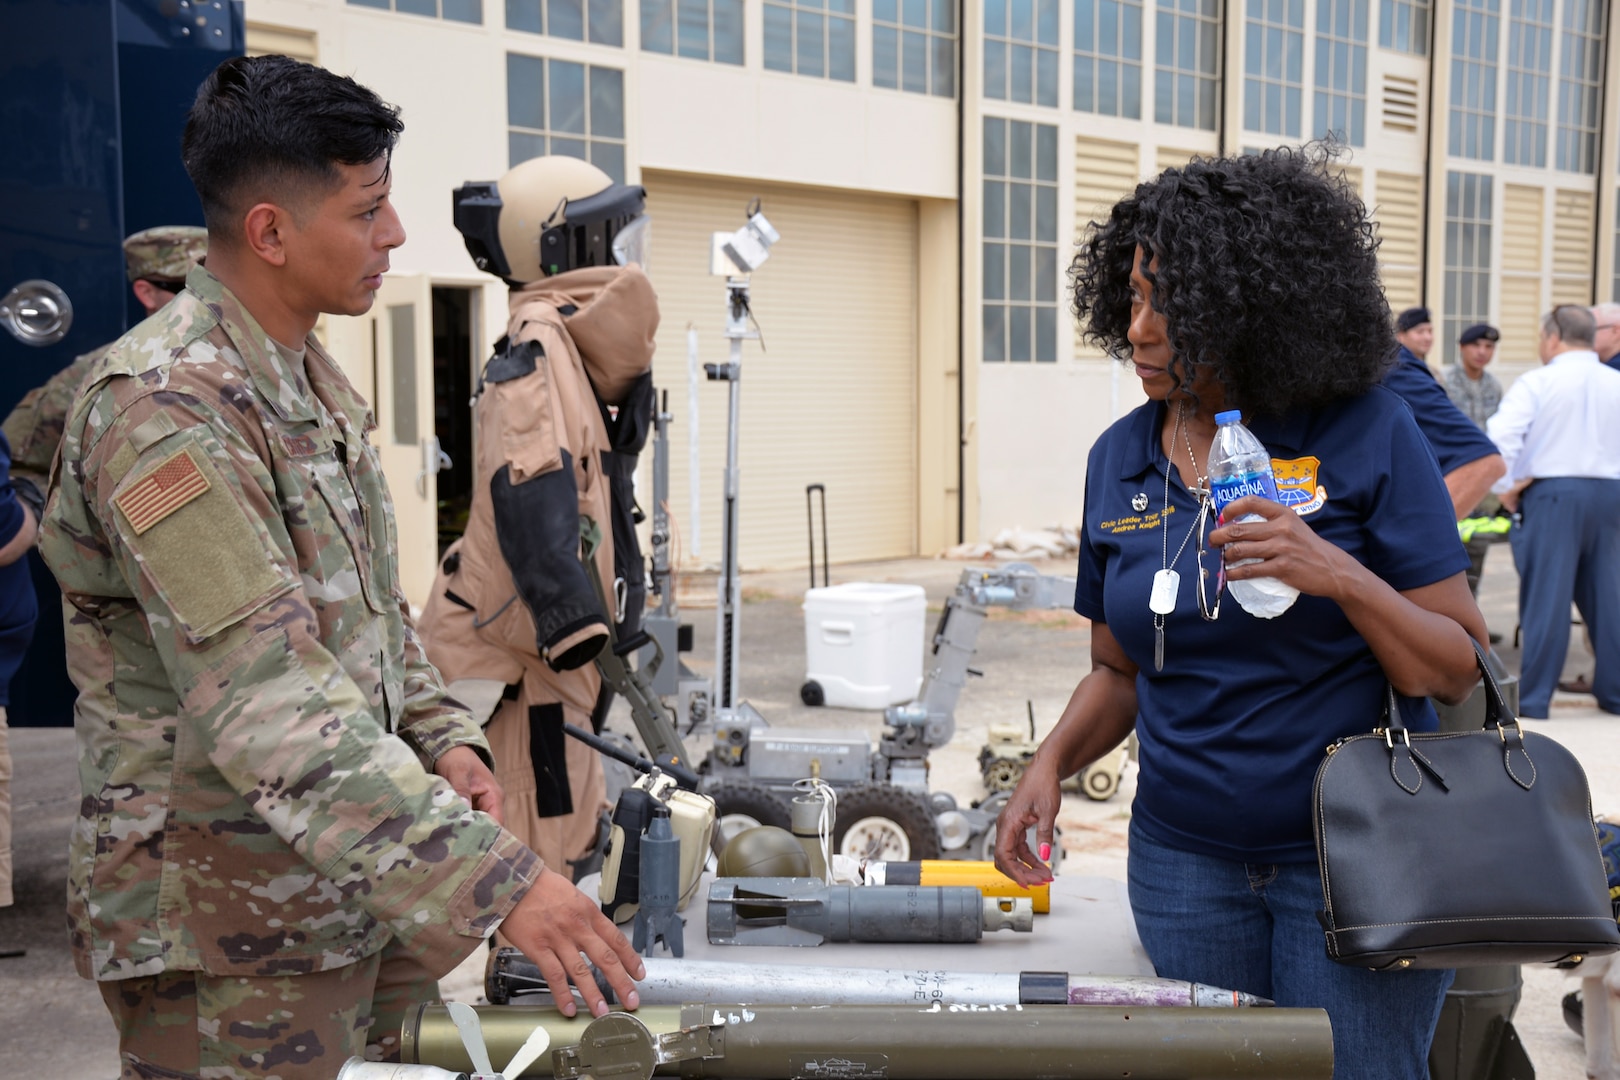 Staff Sgt. Oscar Chavez, 433rd Civil Engineer Squadron explosive ordnance specialist, talks with Honorary Commander Andrea Knight, Frost Bank assistant vice president, about weapons on display during a tour of the 433rd Mission Support Group at Joint Base San Antonio-Lackland Sept. 7. Knight is paired with Col. Wayne M. Williams, 433rd MSG commander.